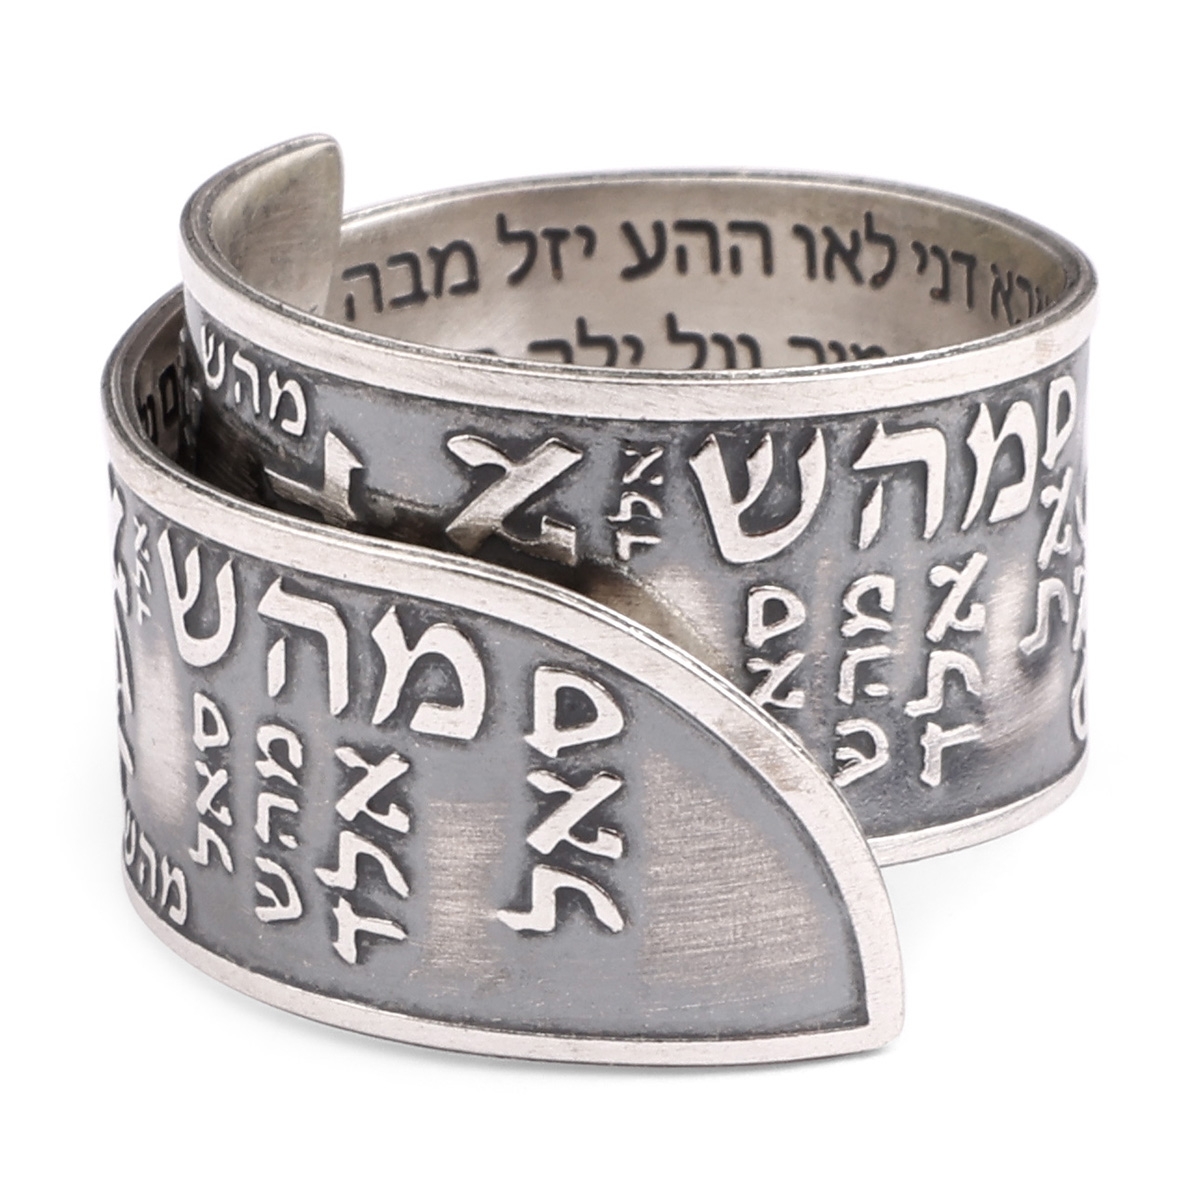 Top 13 Kabbalah Jewelry Pieces from Israel